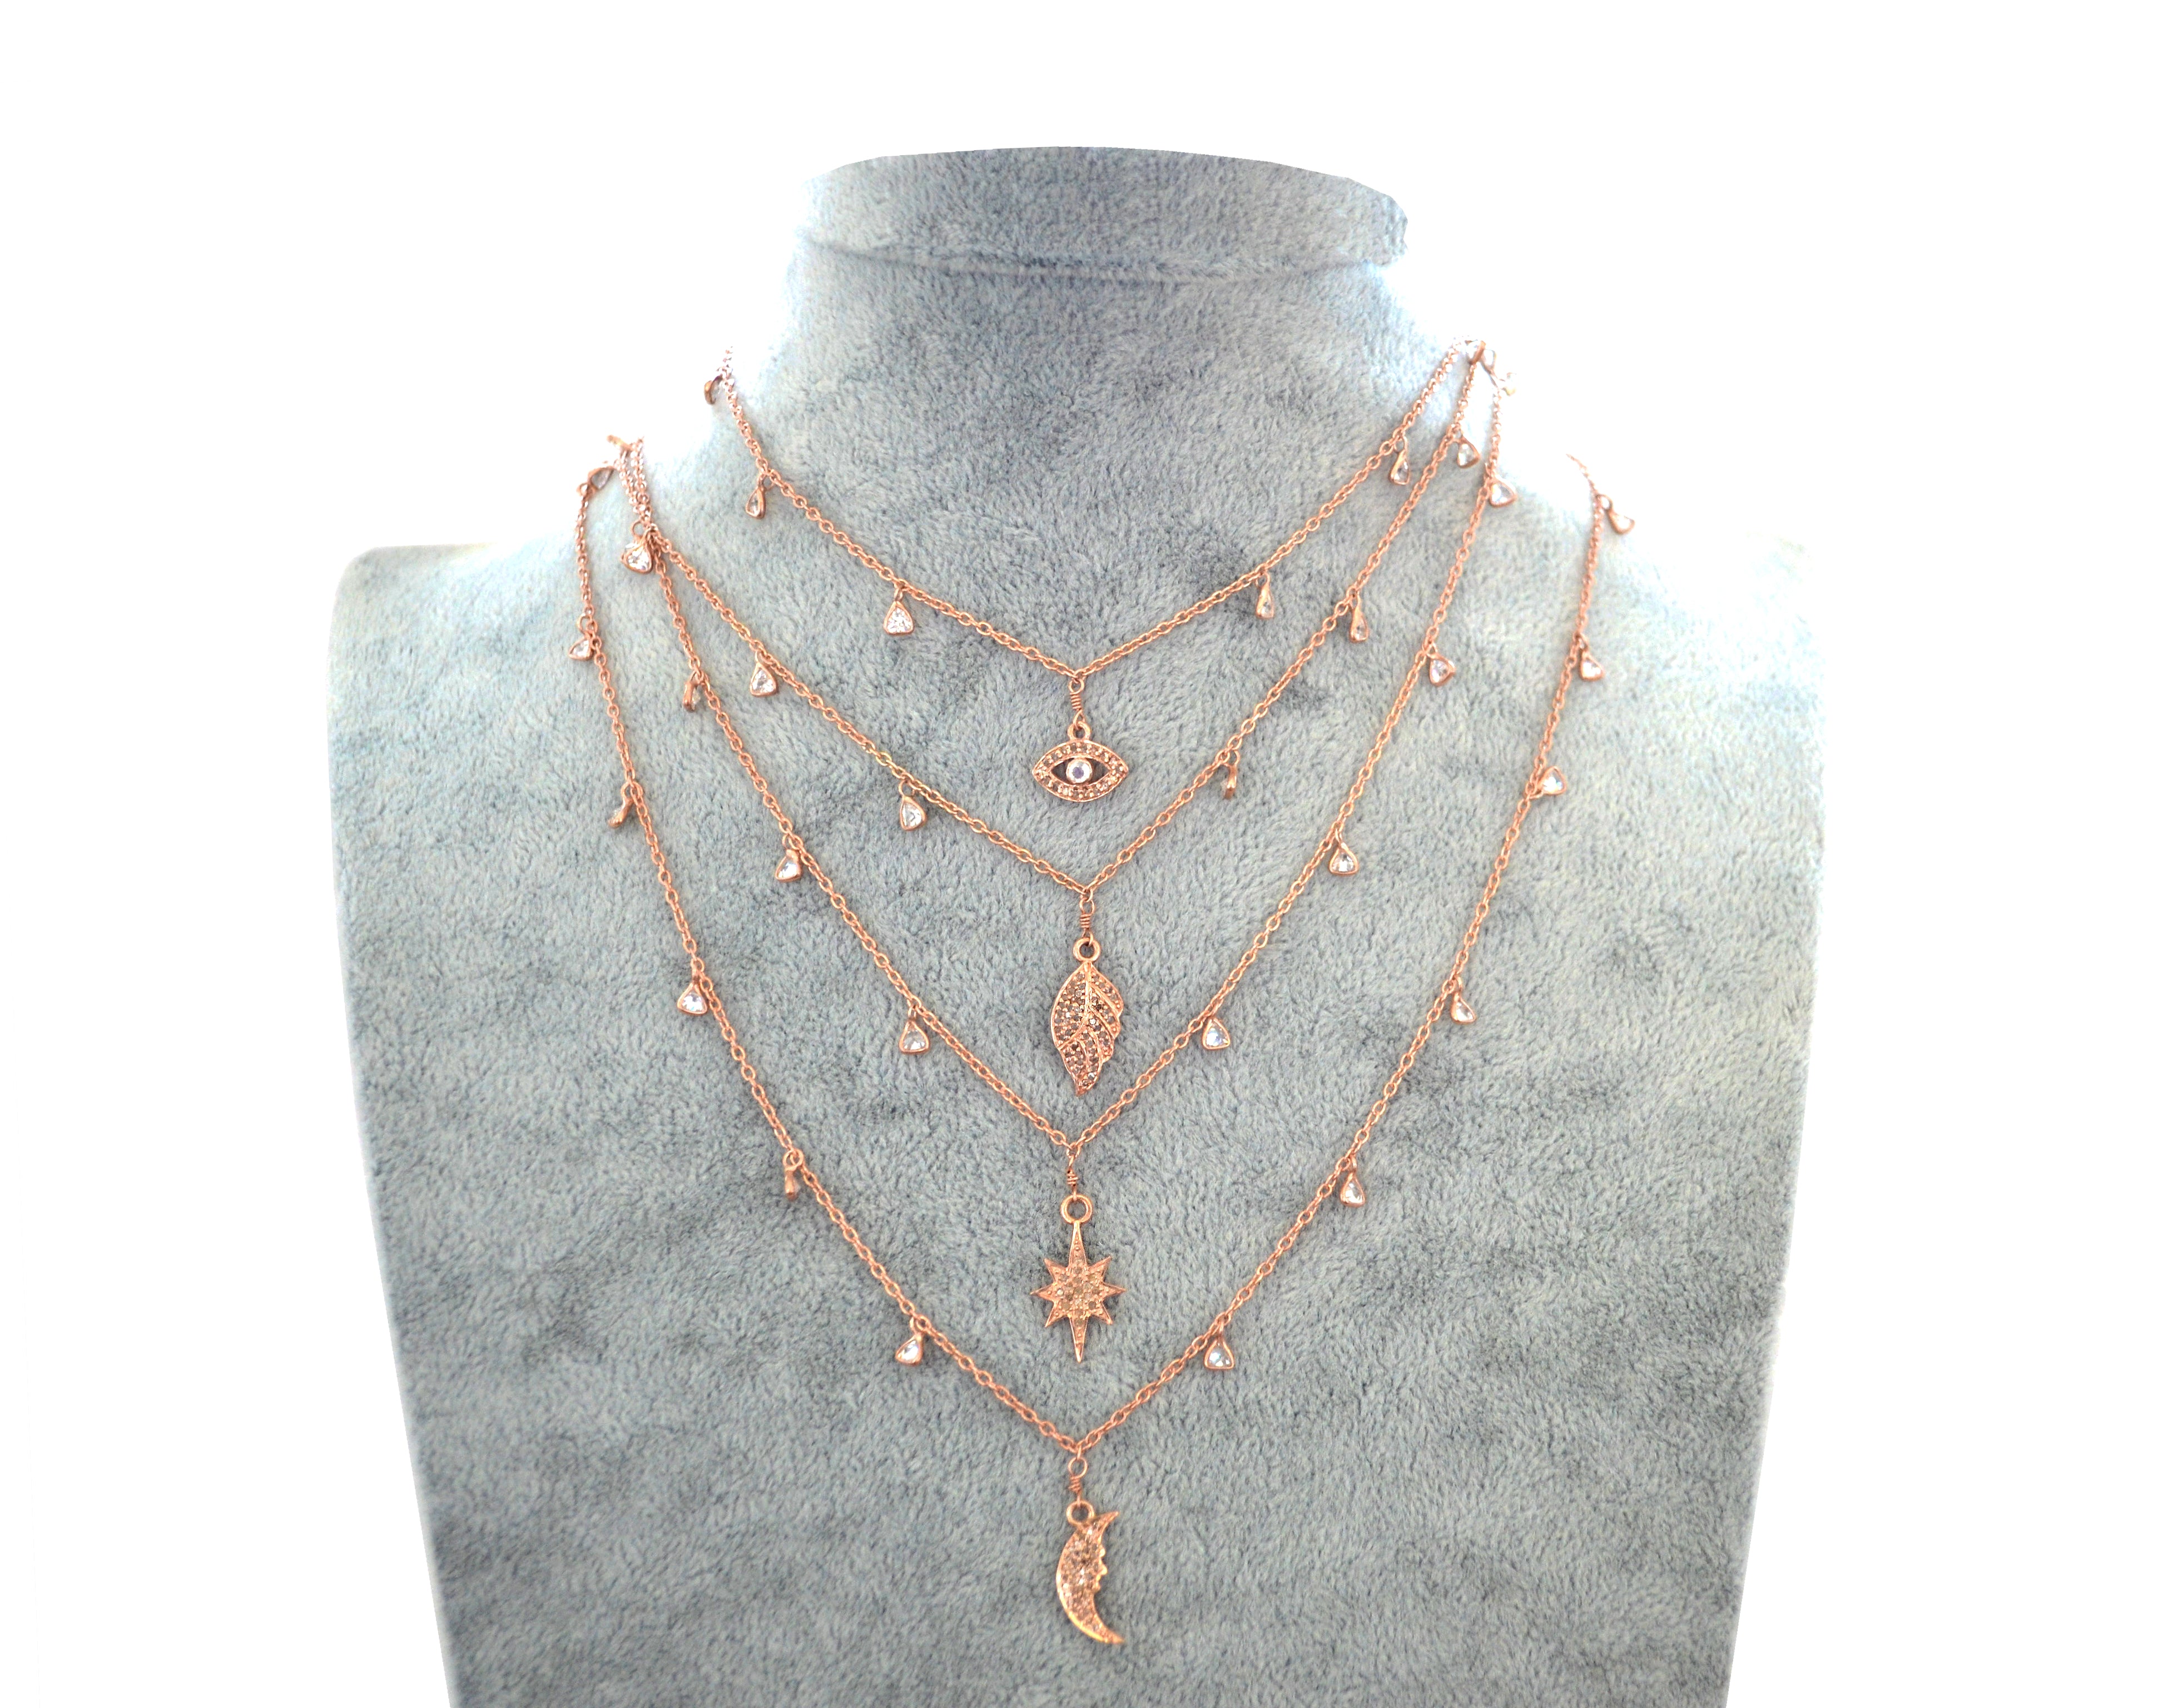 Rose Gold Celestial Diamond Necklace with a Tear Drop Charm